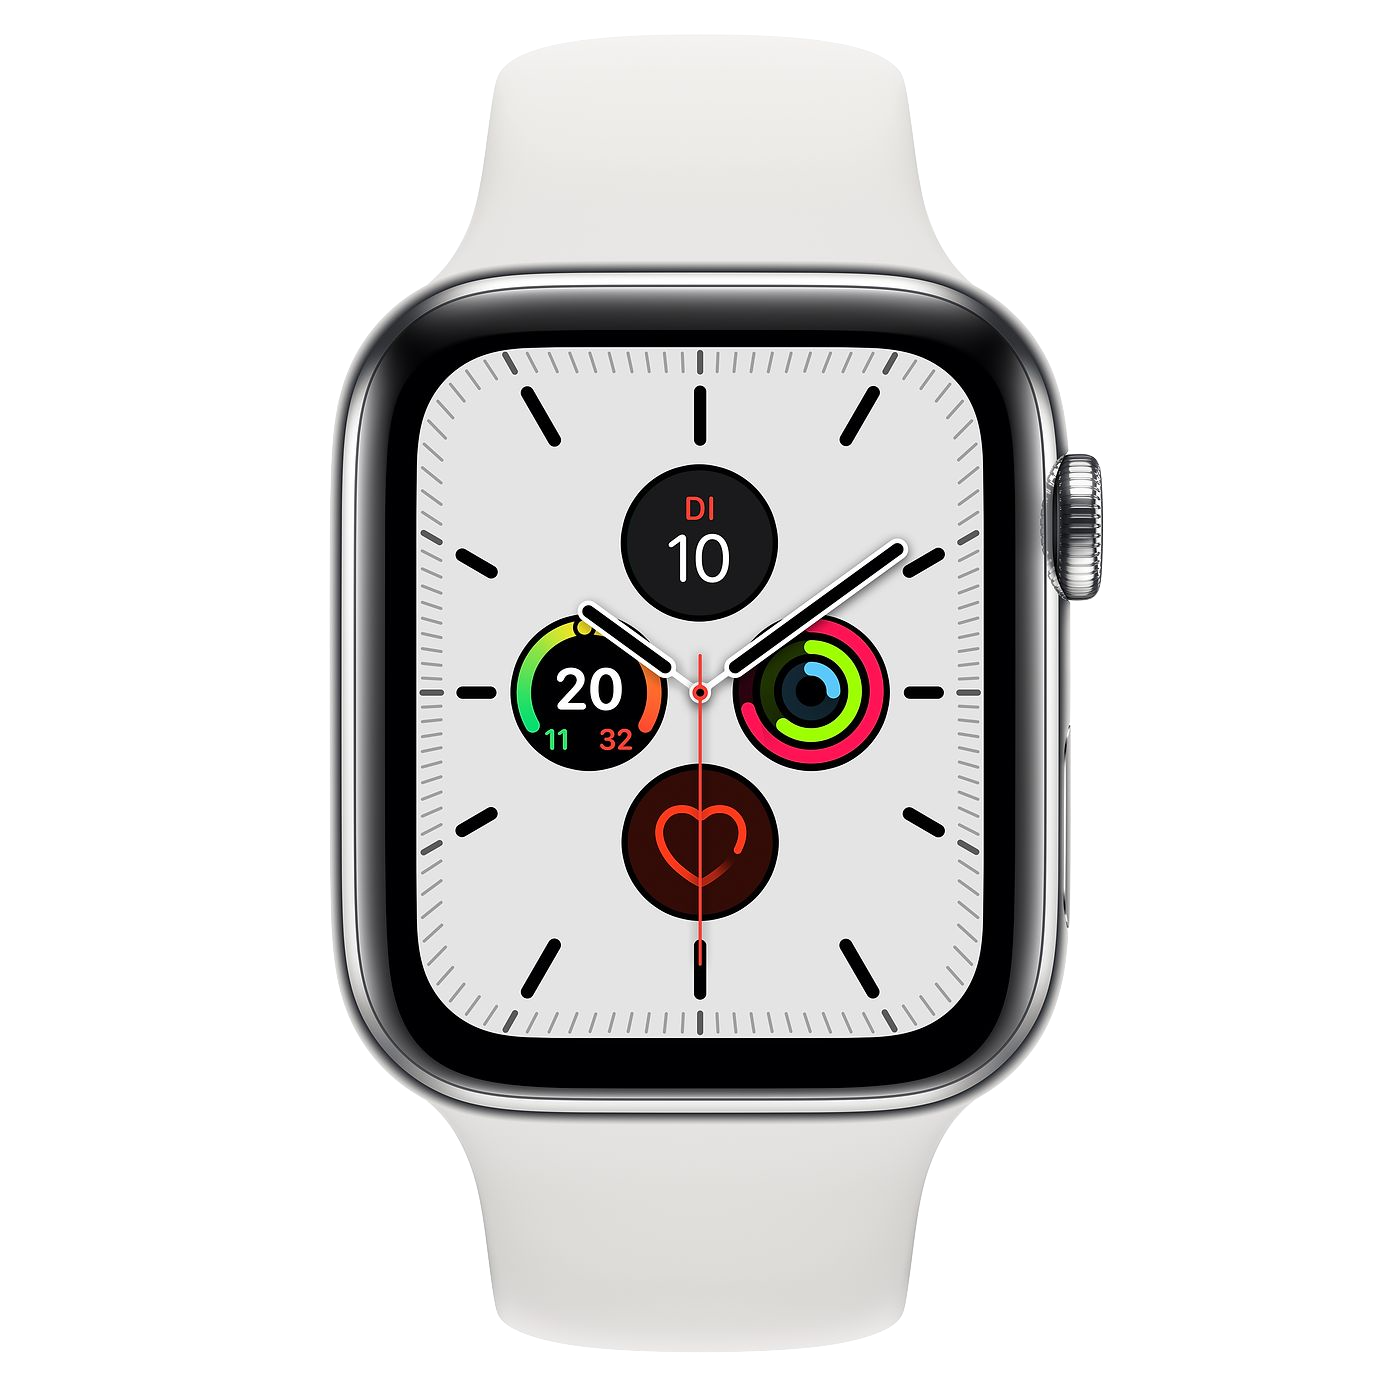 Rent Apple Watch Series 5 GPS + Cellular, Stainless Steel, 44mm 